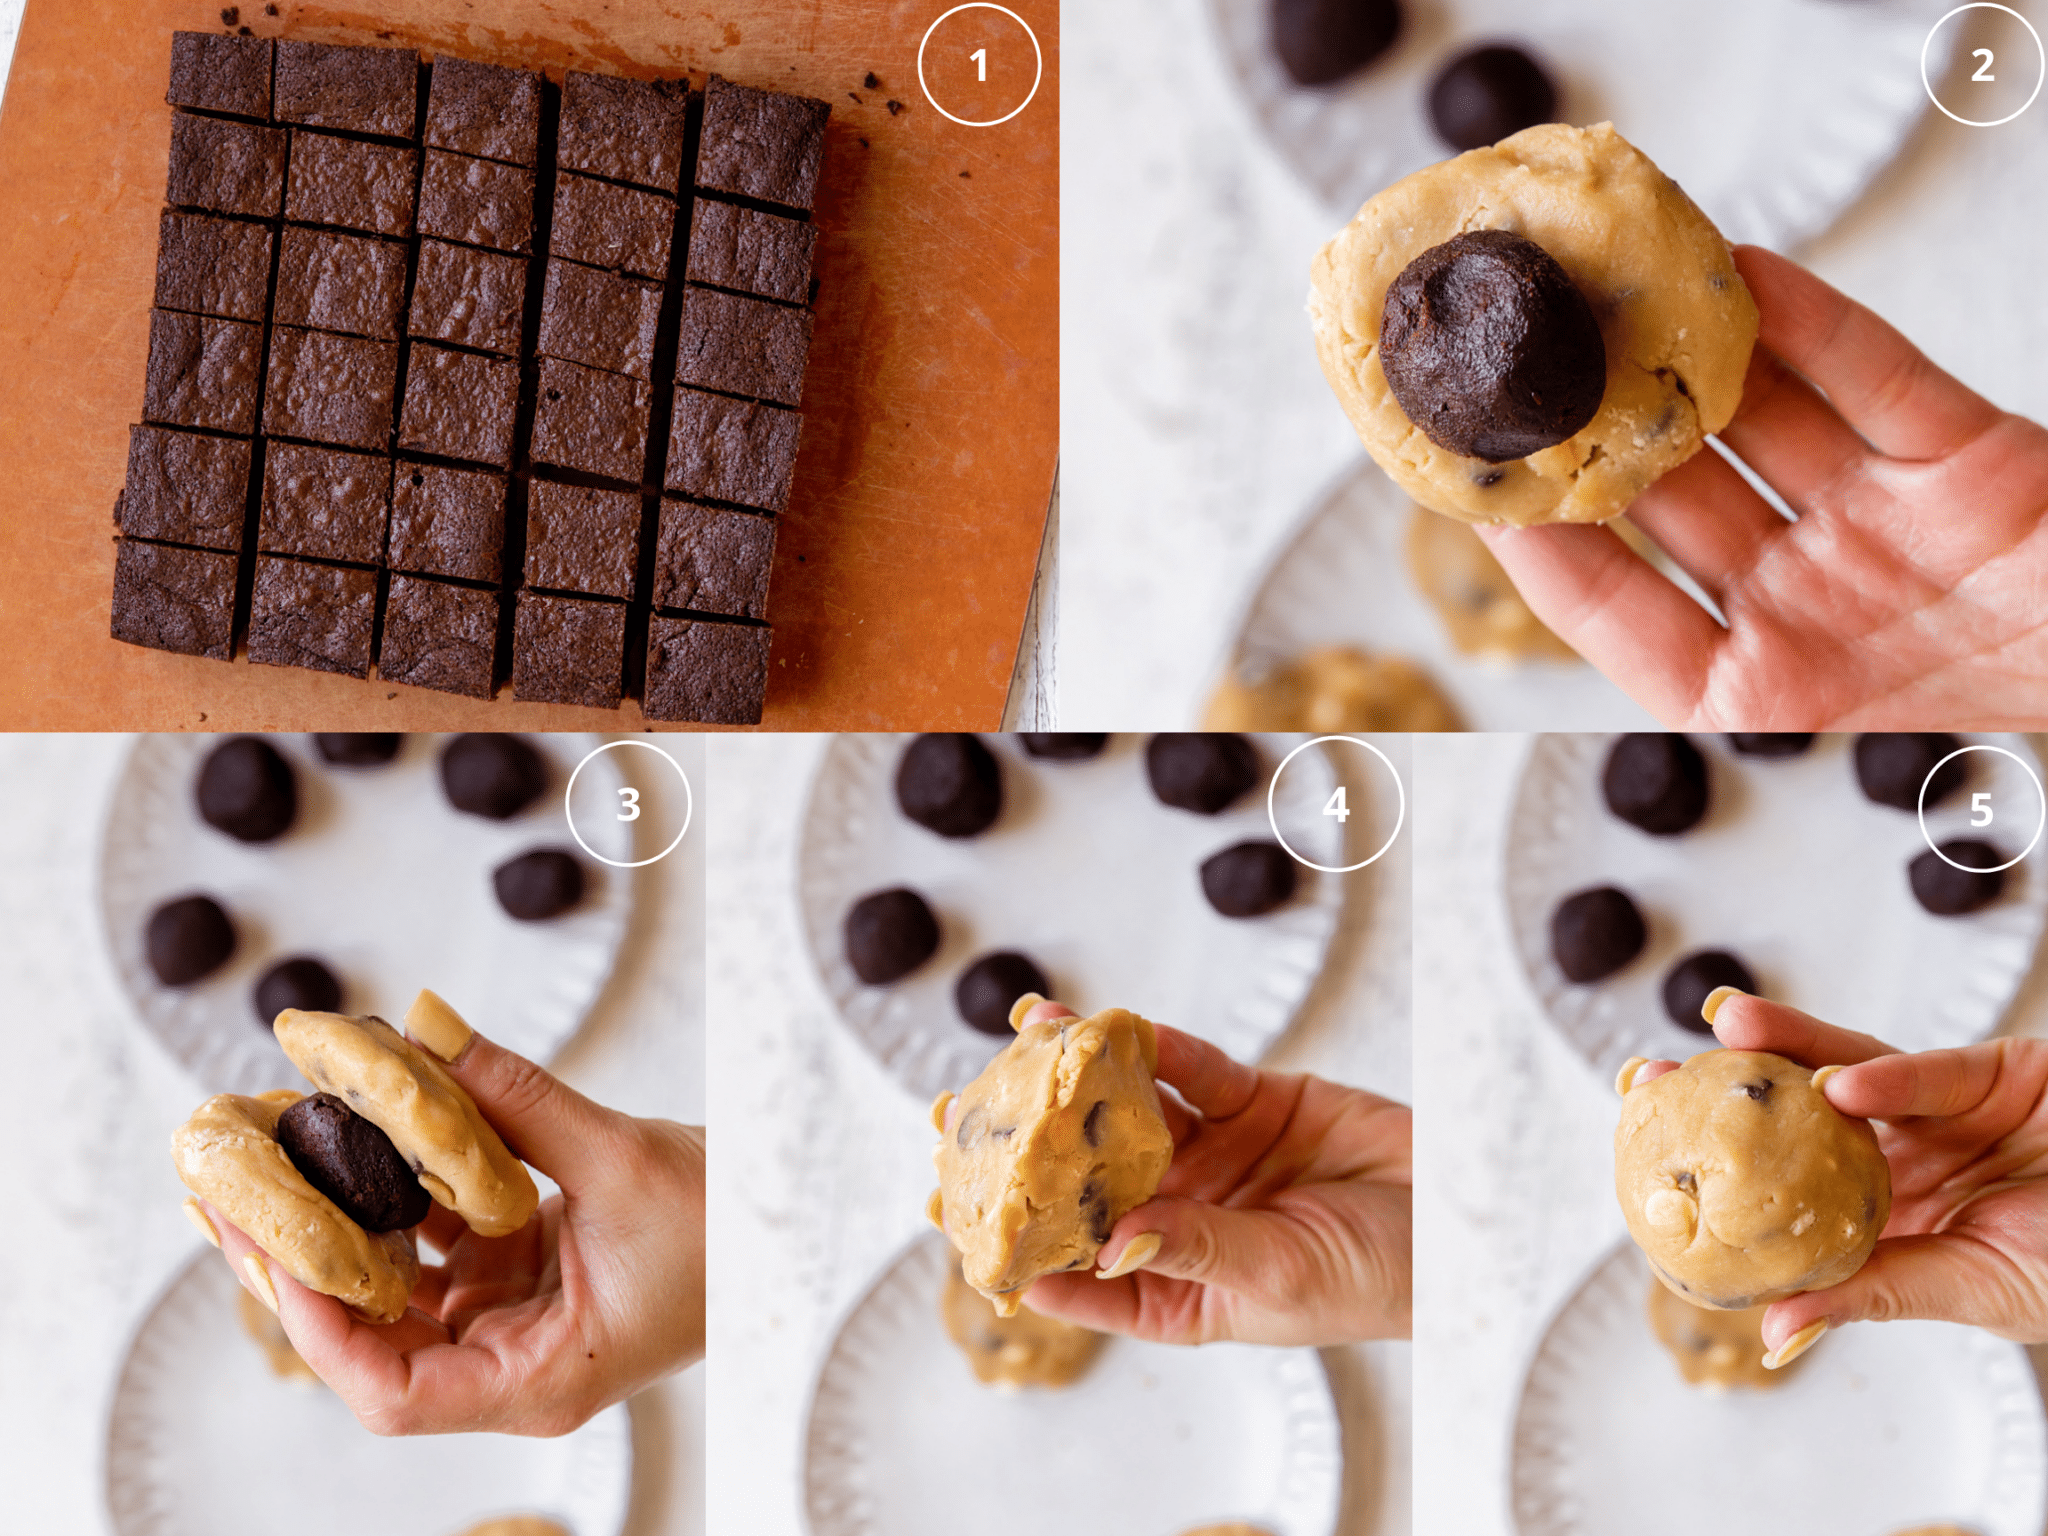 images showing how to stuff a brownie inside a chocolate chip cookie.